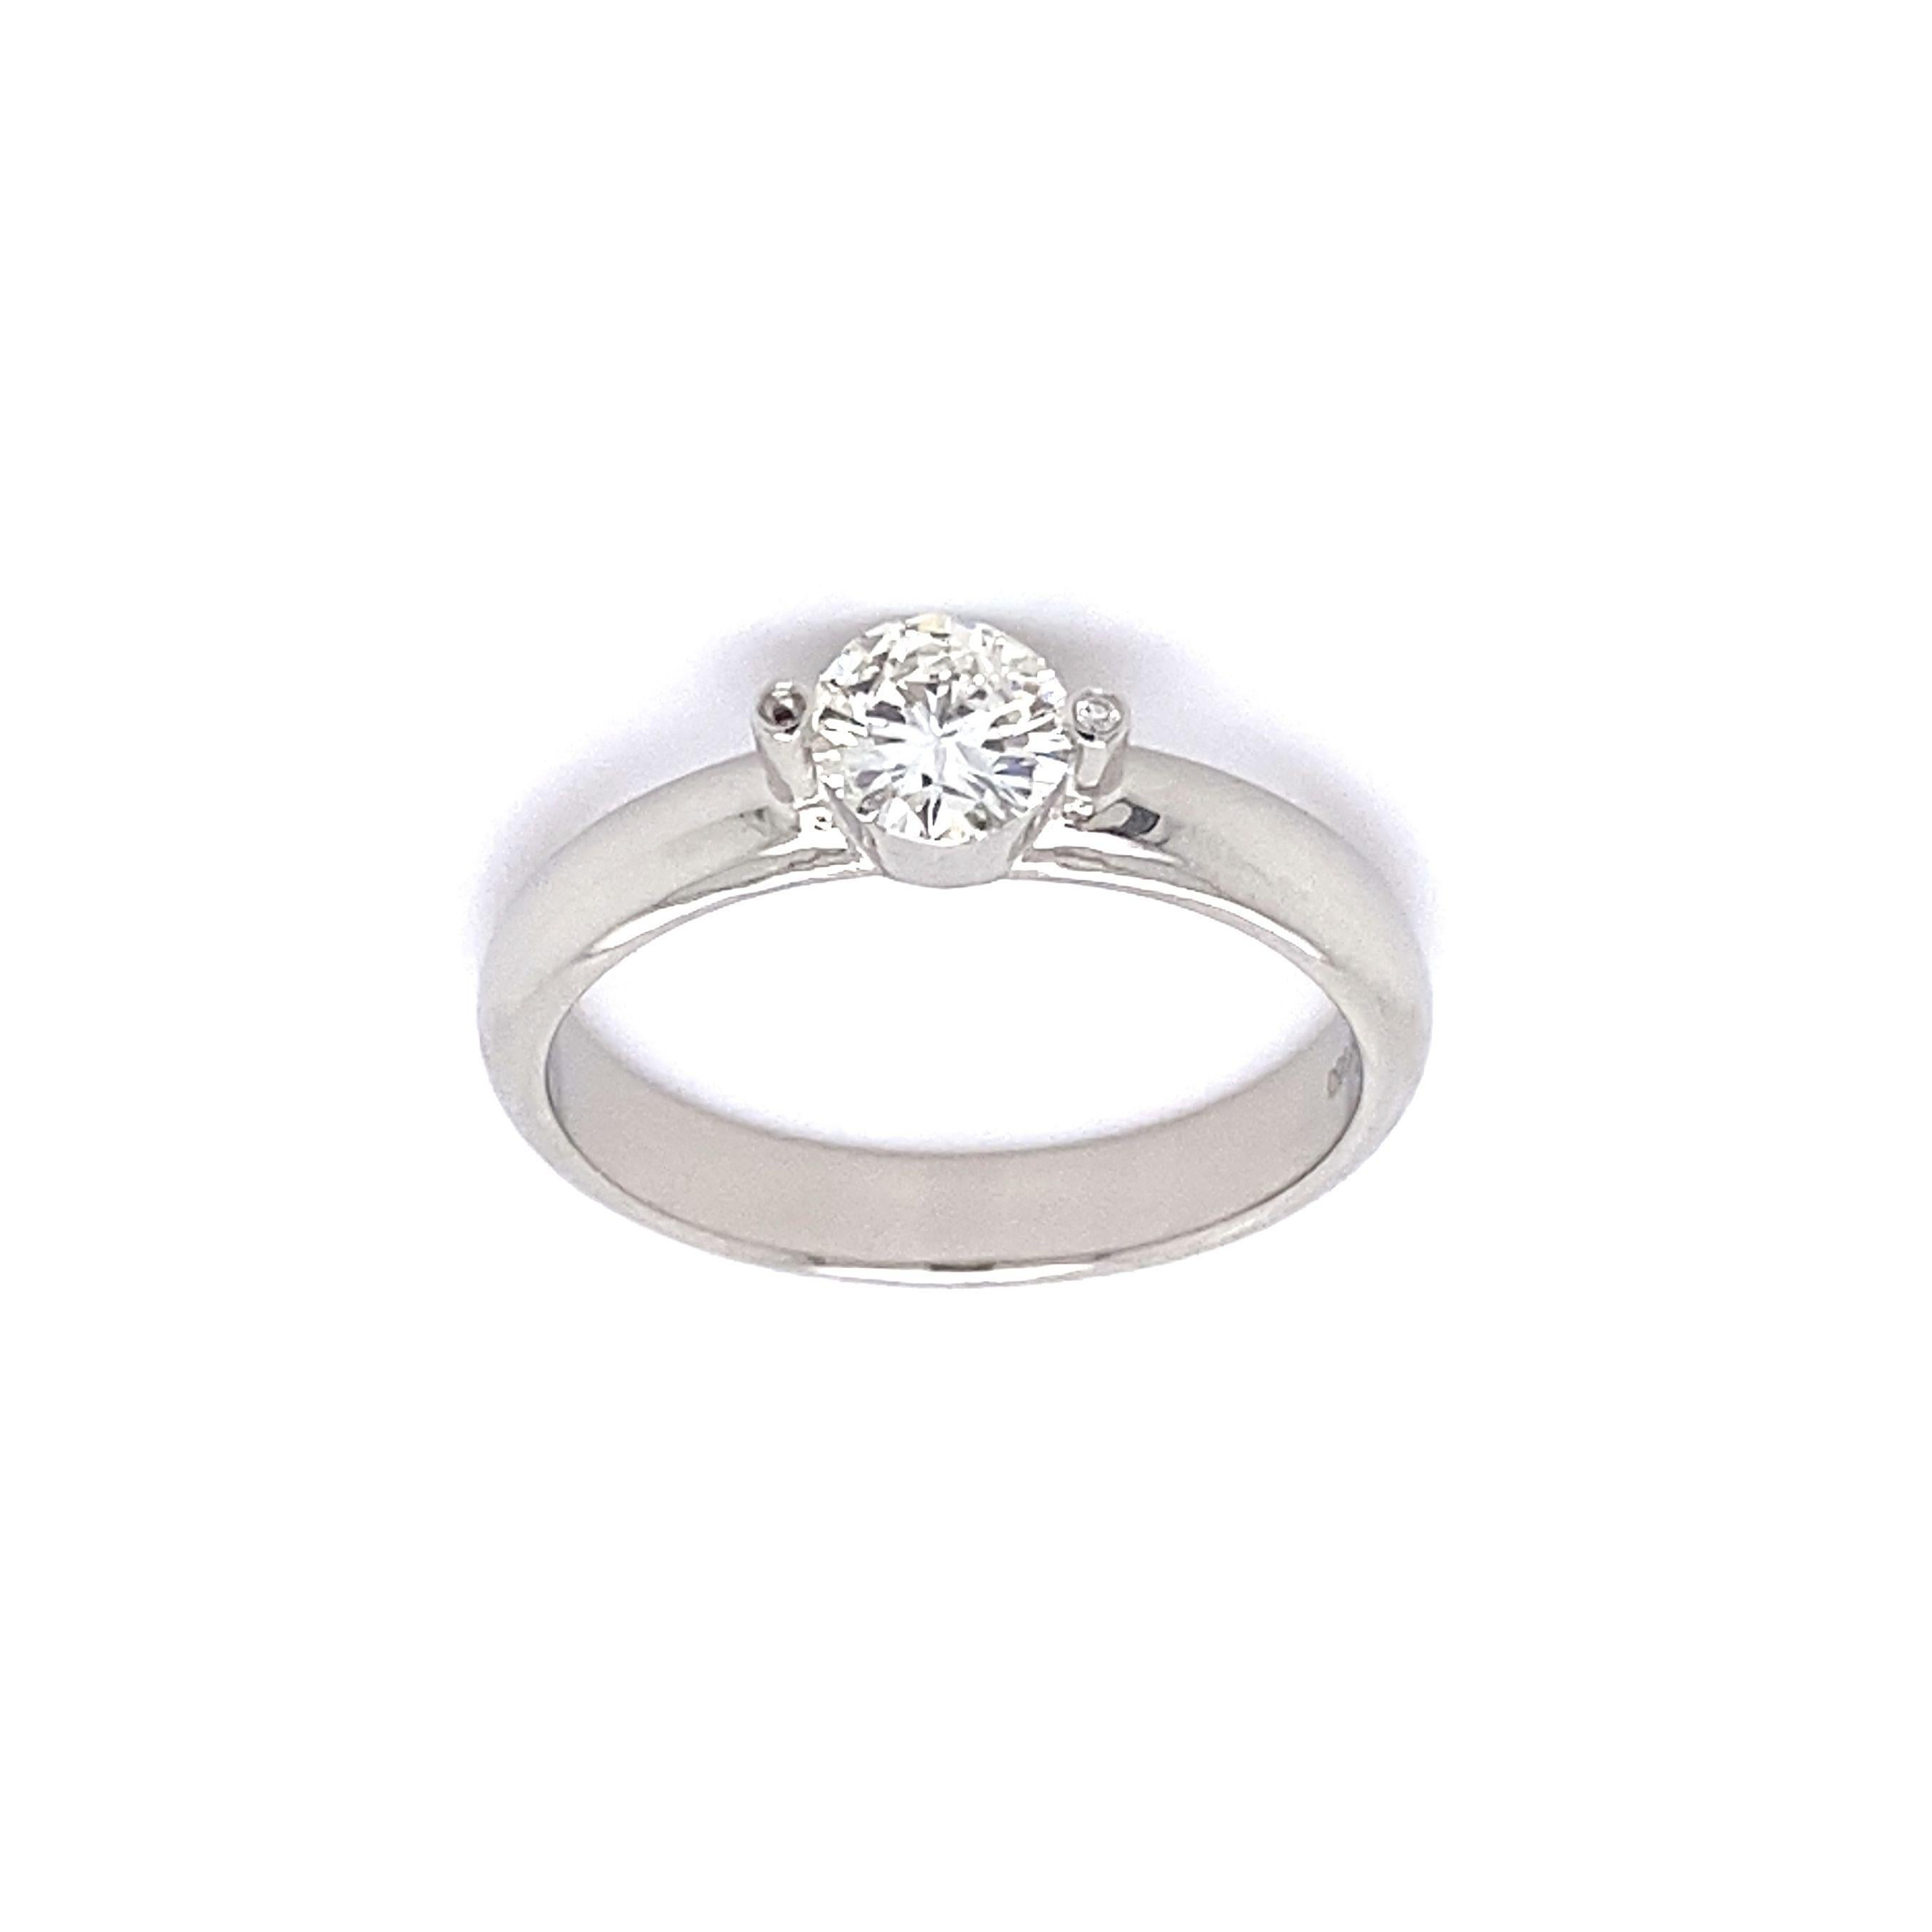 Designer Gumuchian Solitaire Diamond Platinum Ring, securely nestled with a Hand set Round Brilliant Cut Diamond weighing approx. 0.52 Carat, H/I color, I1 clarity, accented by side Diamonds. Hand crafted in Platinum. Measuring approx. 0.89” L x